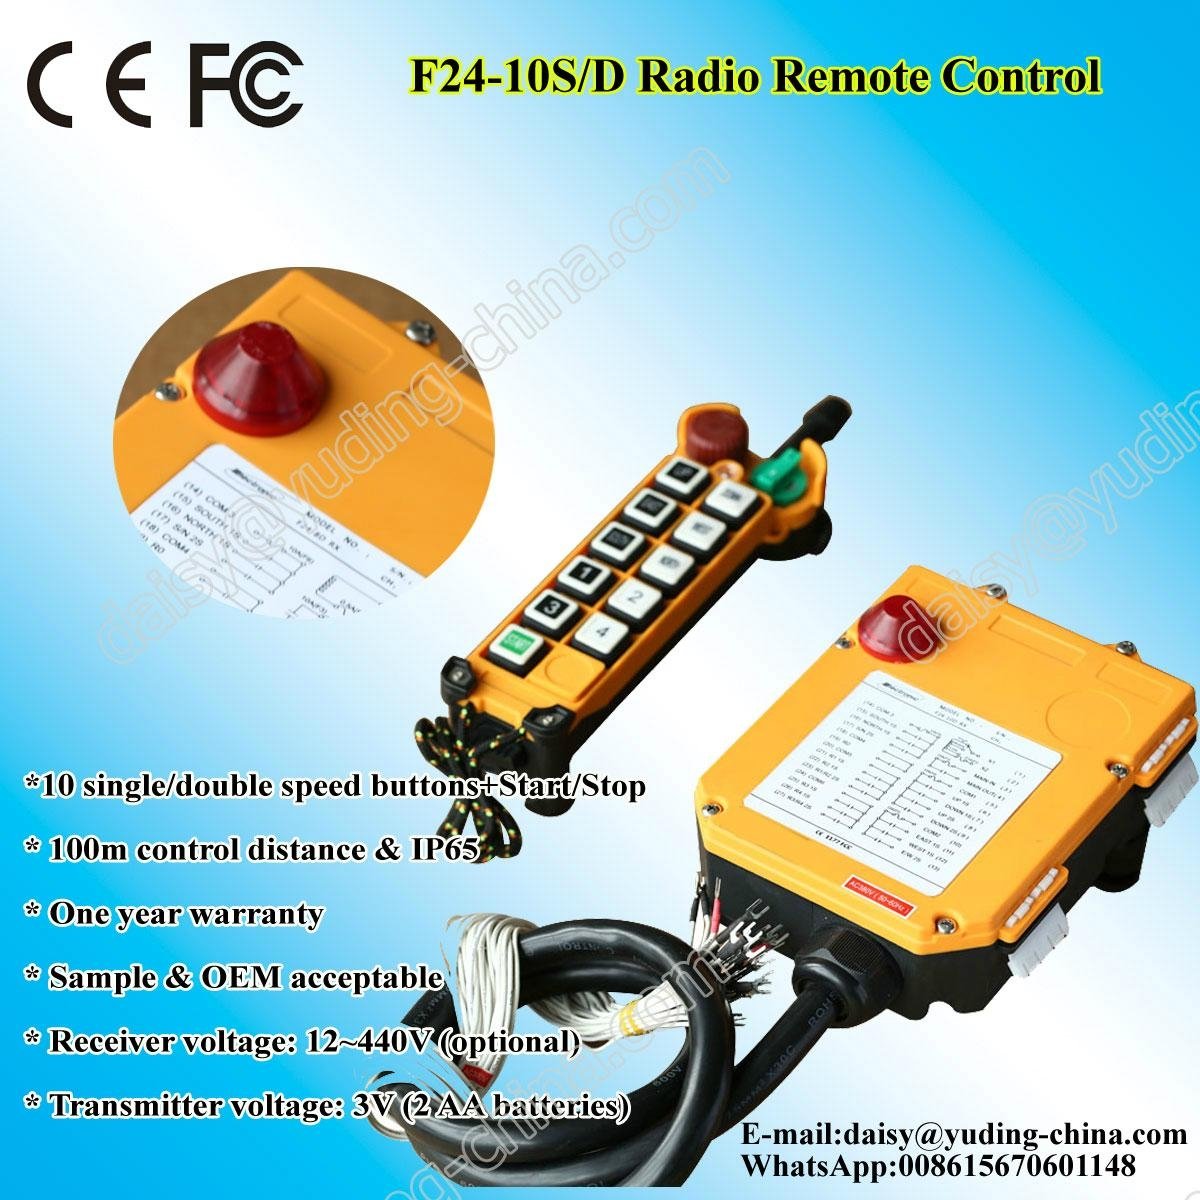 F24-10D wireless remote controlled electrical switch